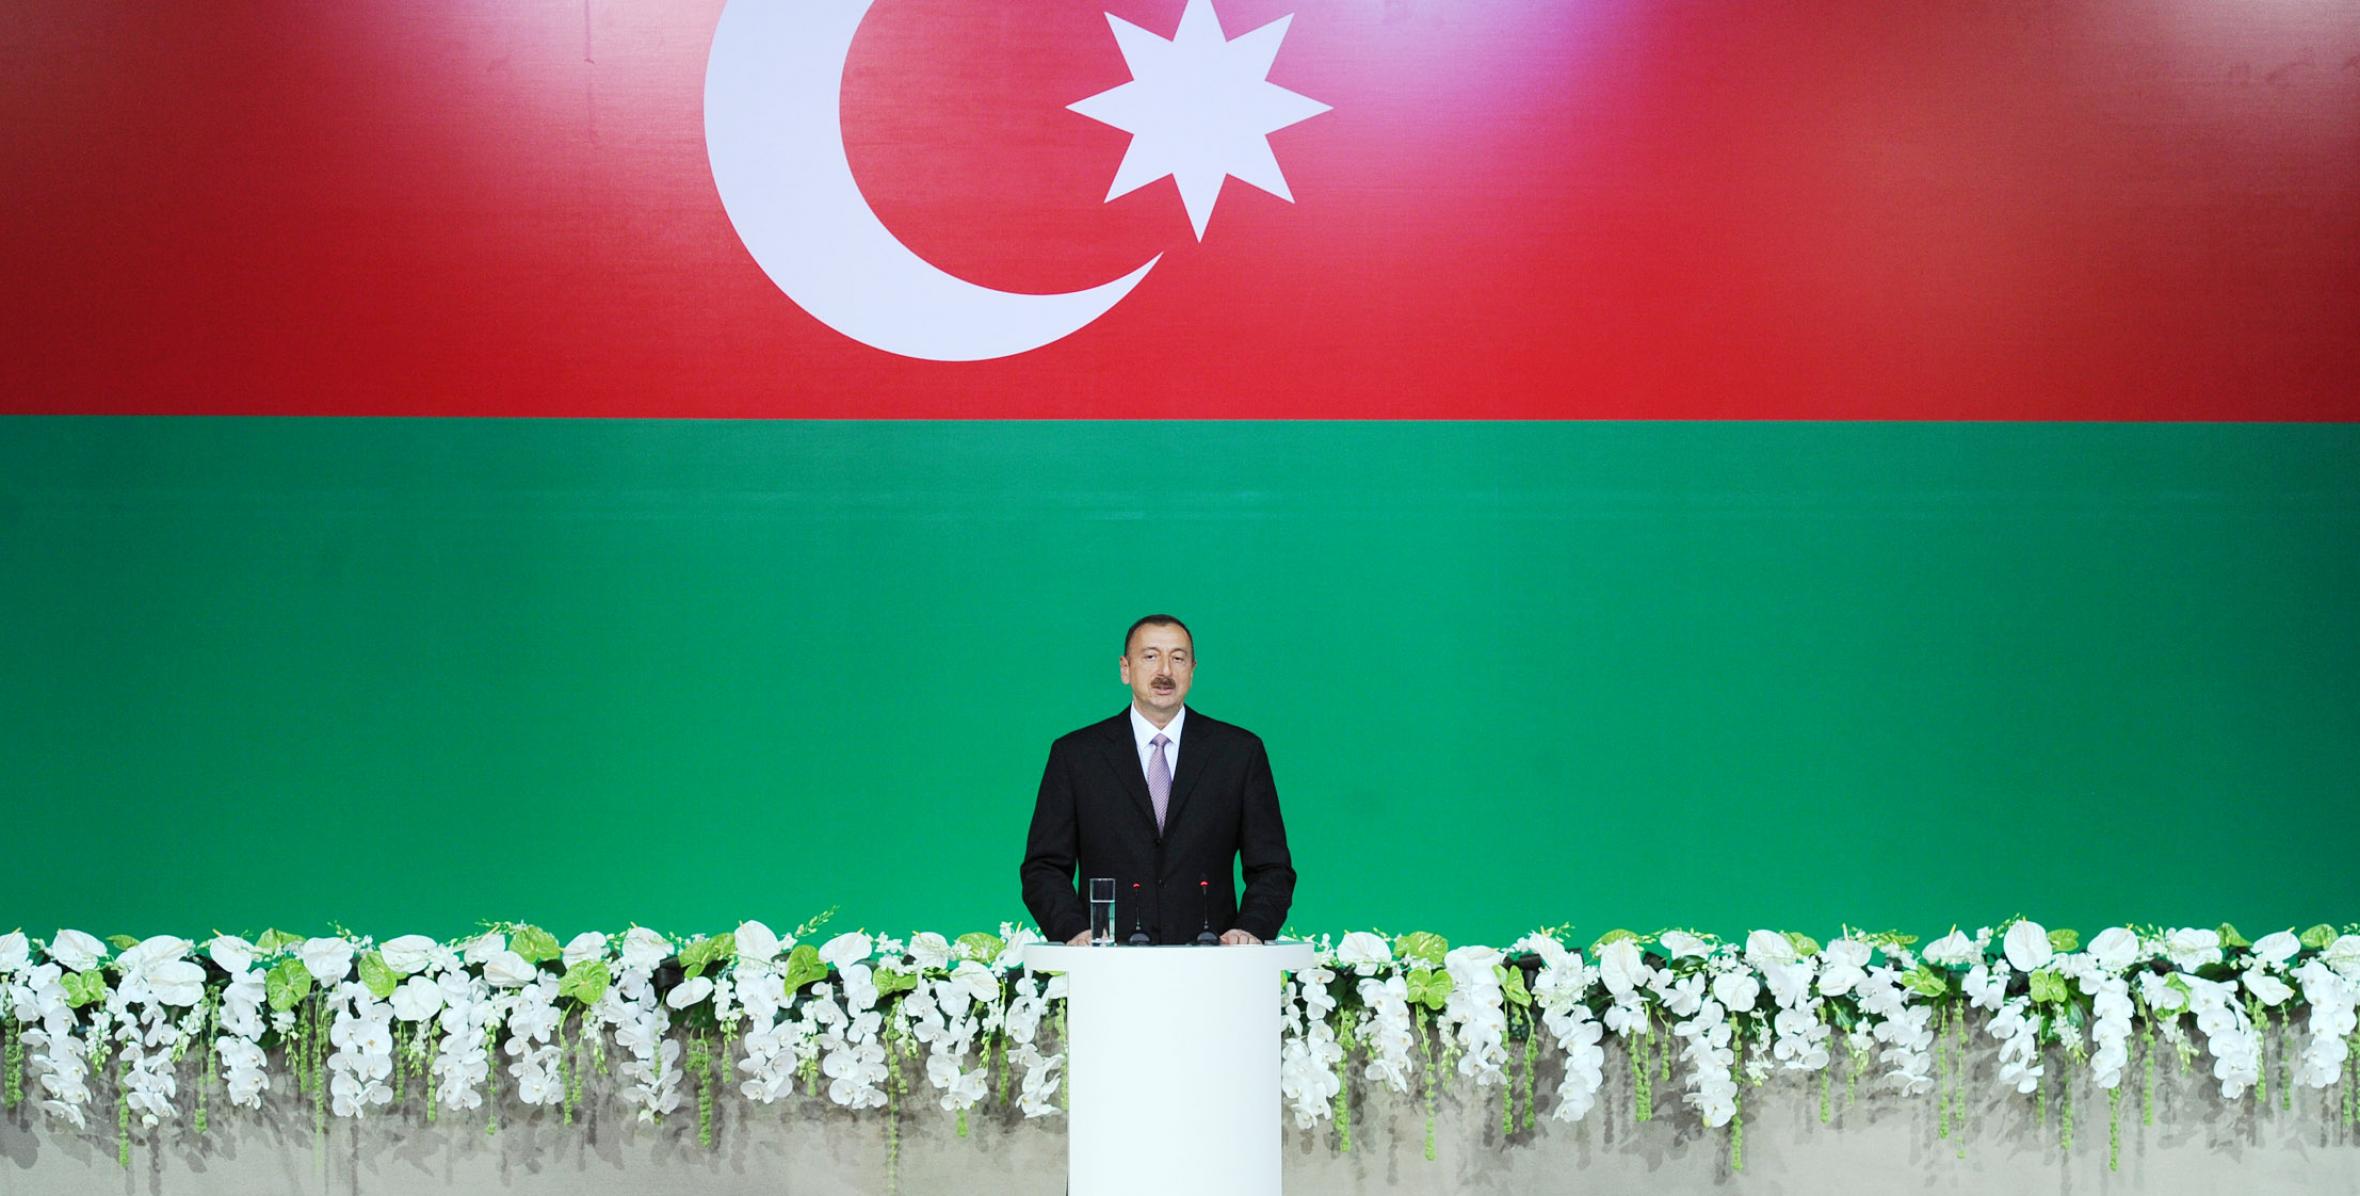 Ilham Aliyev attended an official reception on the occasion of the national holiday of Azerbaijan - the Republic Day